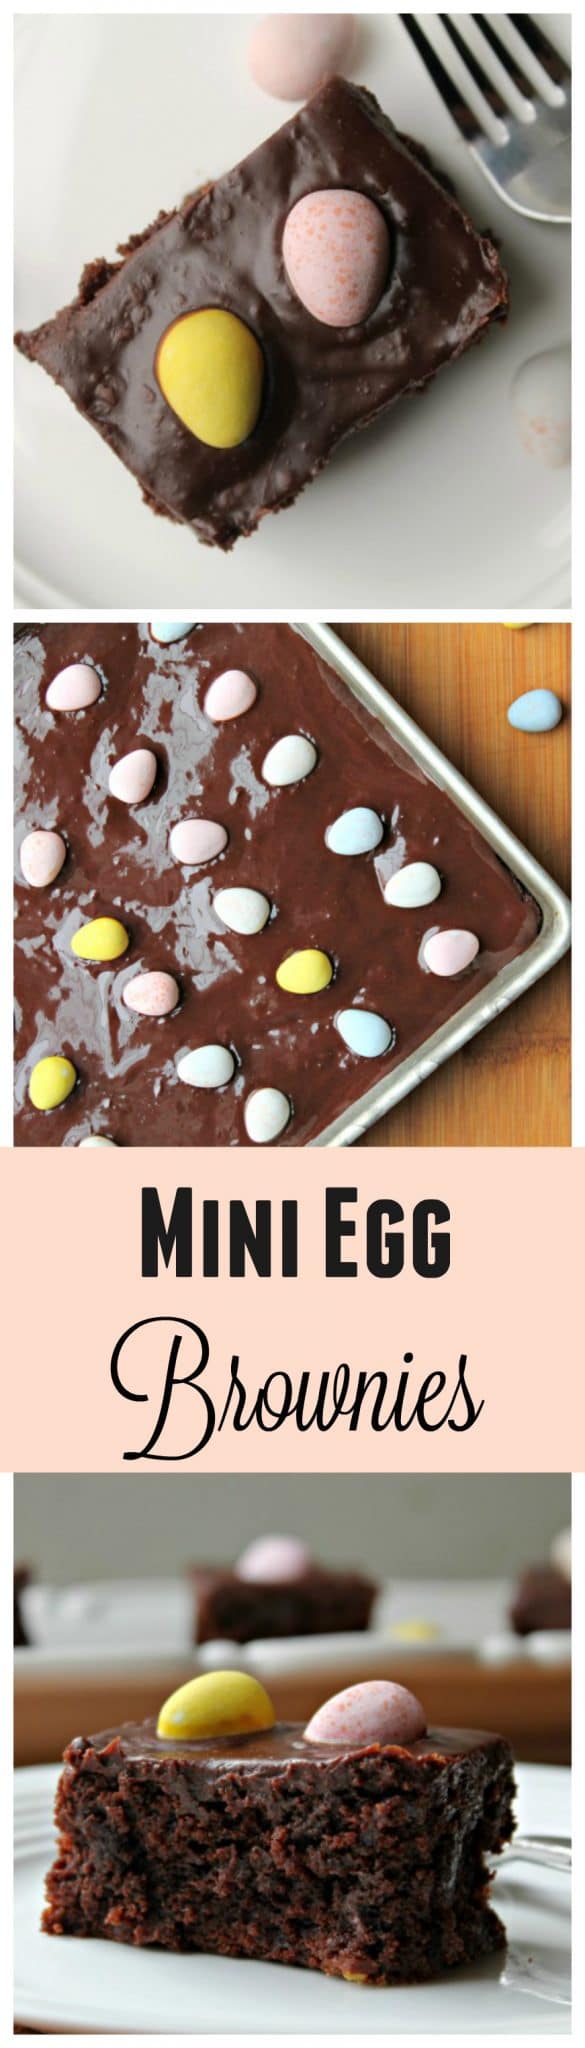 Mini Egg Brownies finished with a luscious chocolate ganache